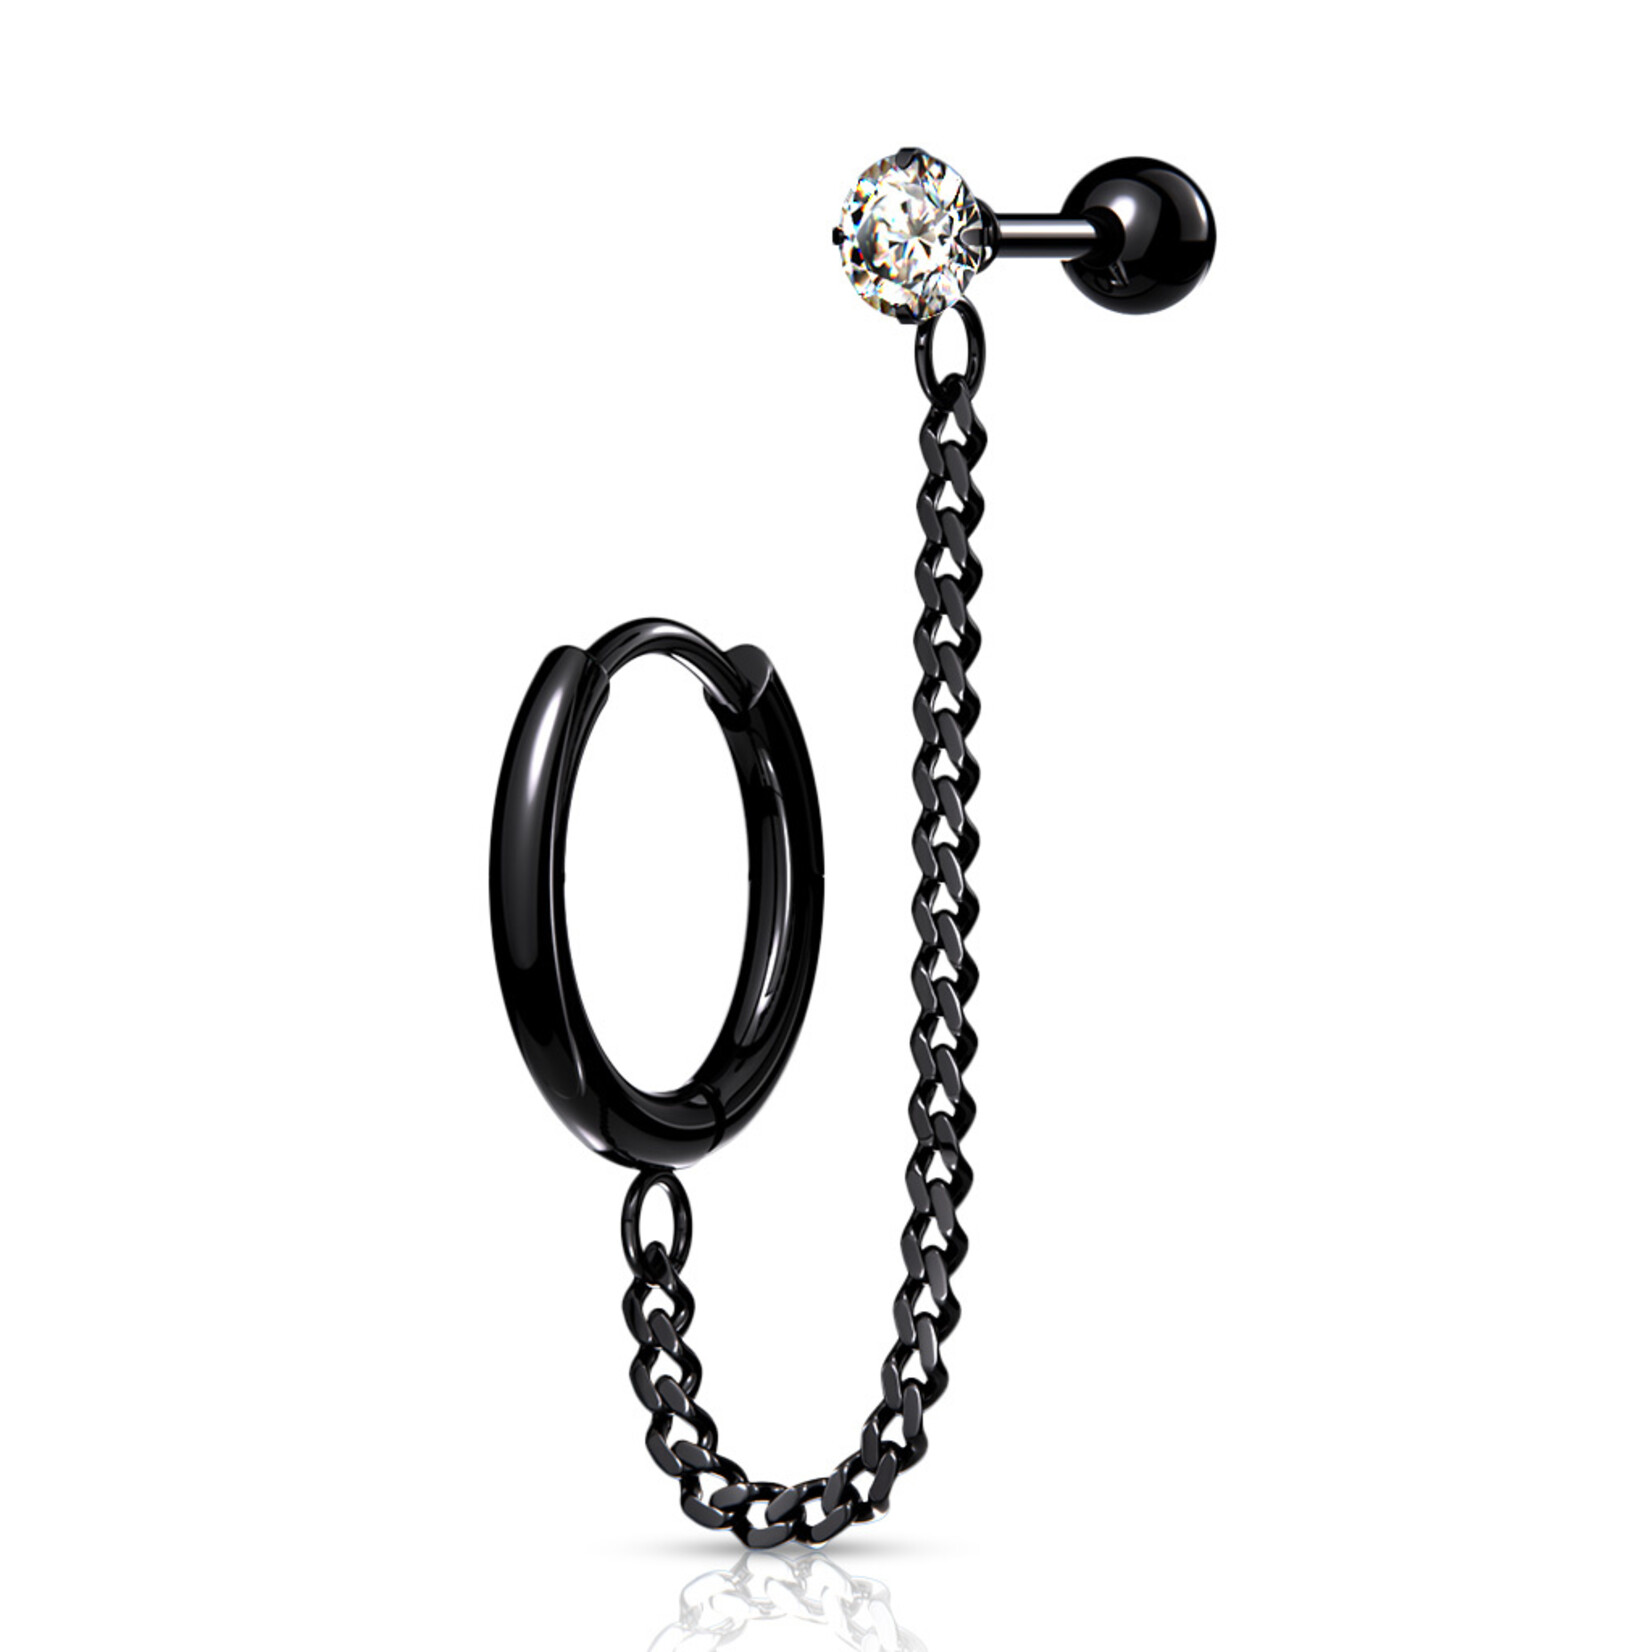 Hollywood Body Jewelry Round Clicker Hoop Earring and Chain Linked Cartilage Barbell